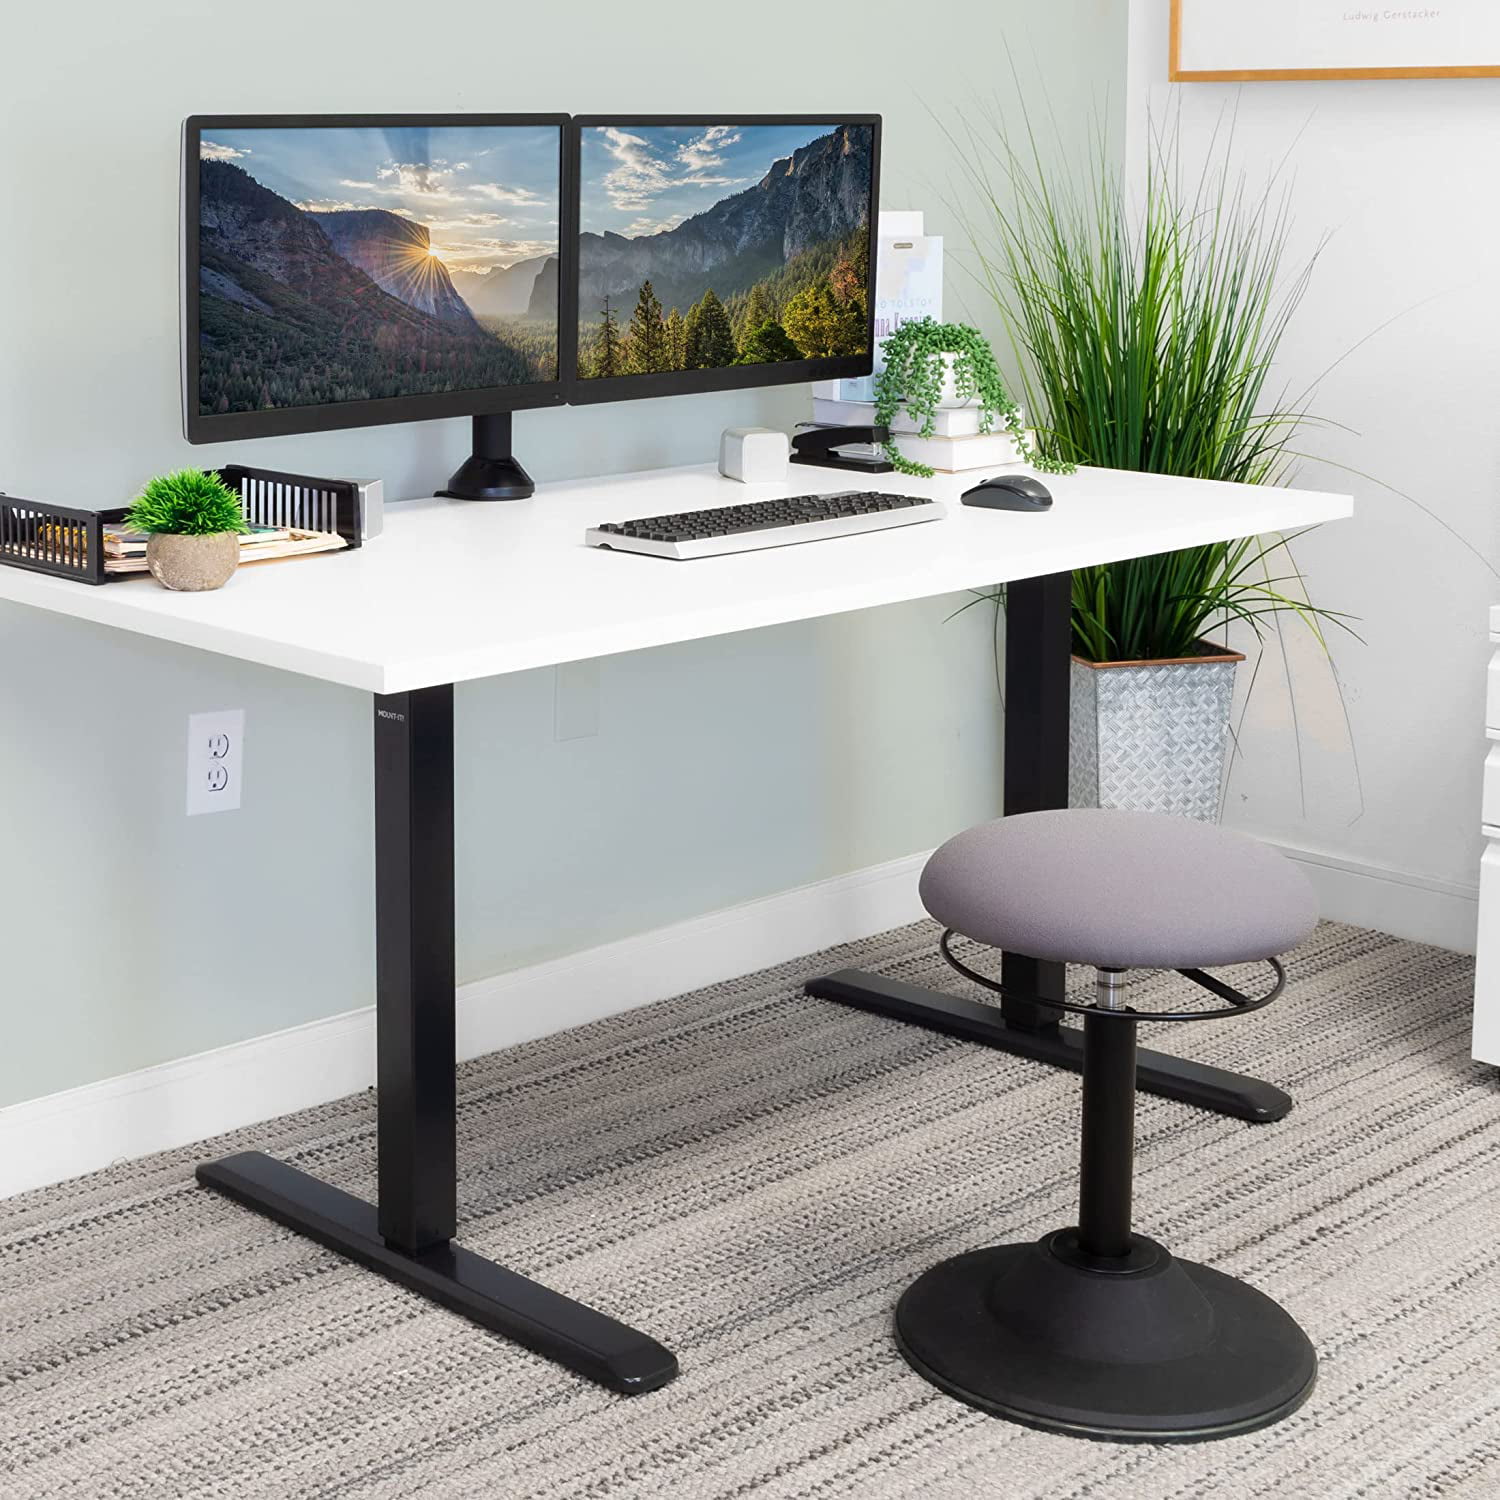 Double Monitor Desk Stand Dual Monitor Mount VESA 75 100 Interchangeable C-Clamp and Grommet Base Two Heavy Duty Height Adjustable Arms Fit 2 Computer Screens 19 21.5 24 27 32 Inches Mount-It 